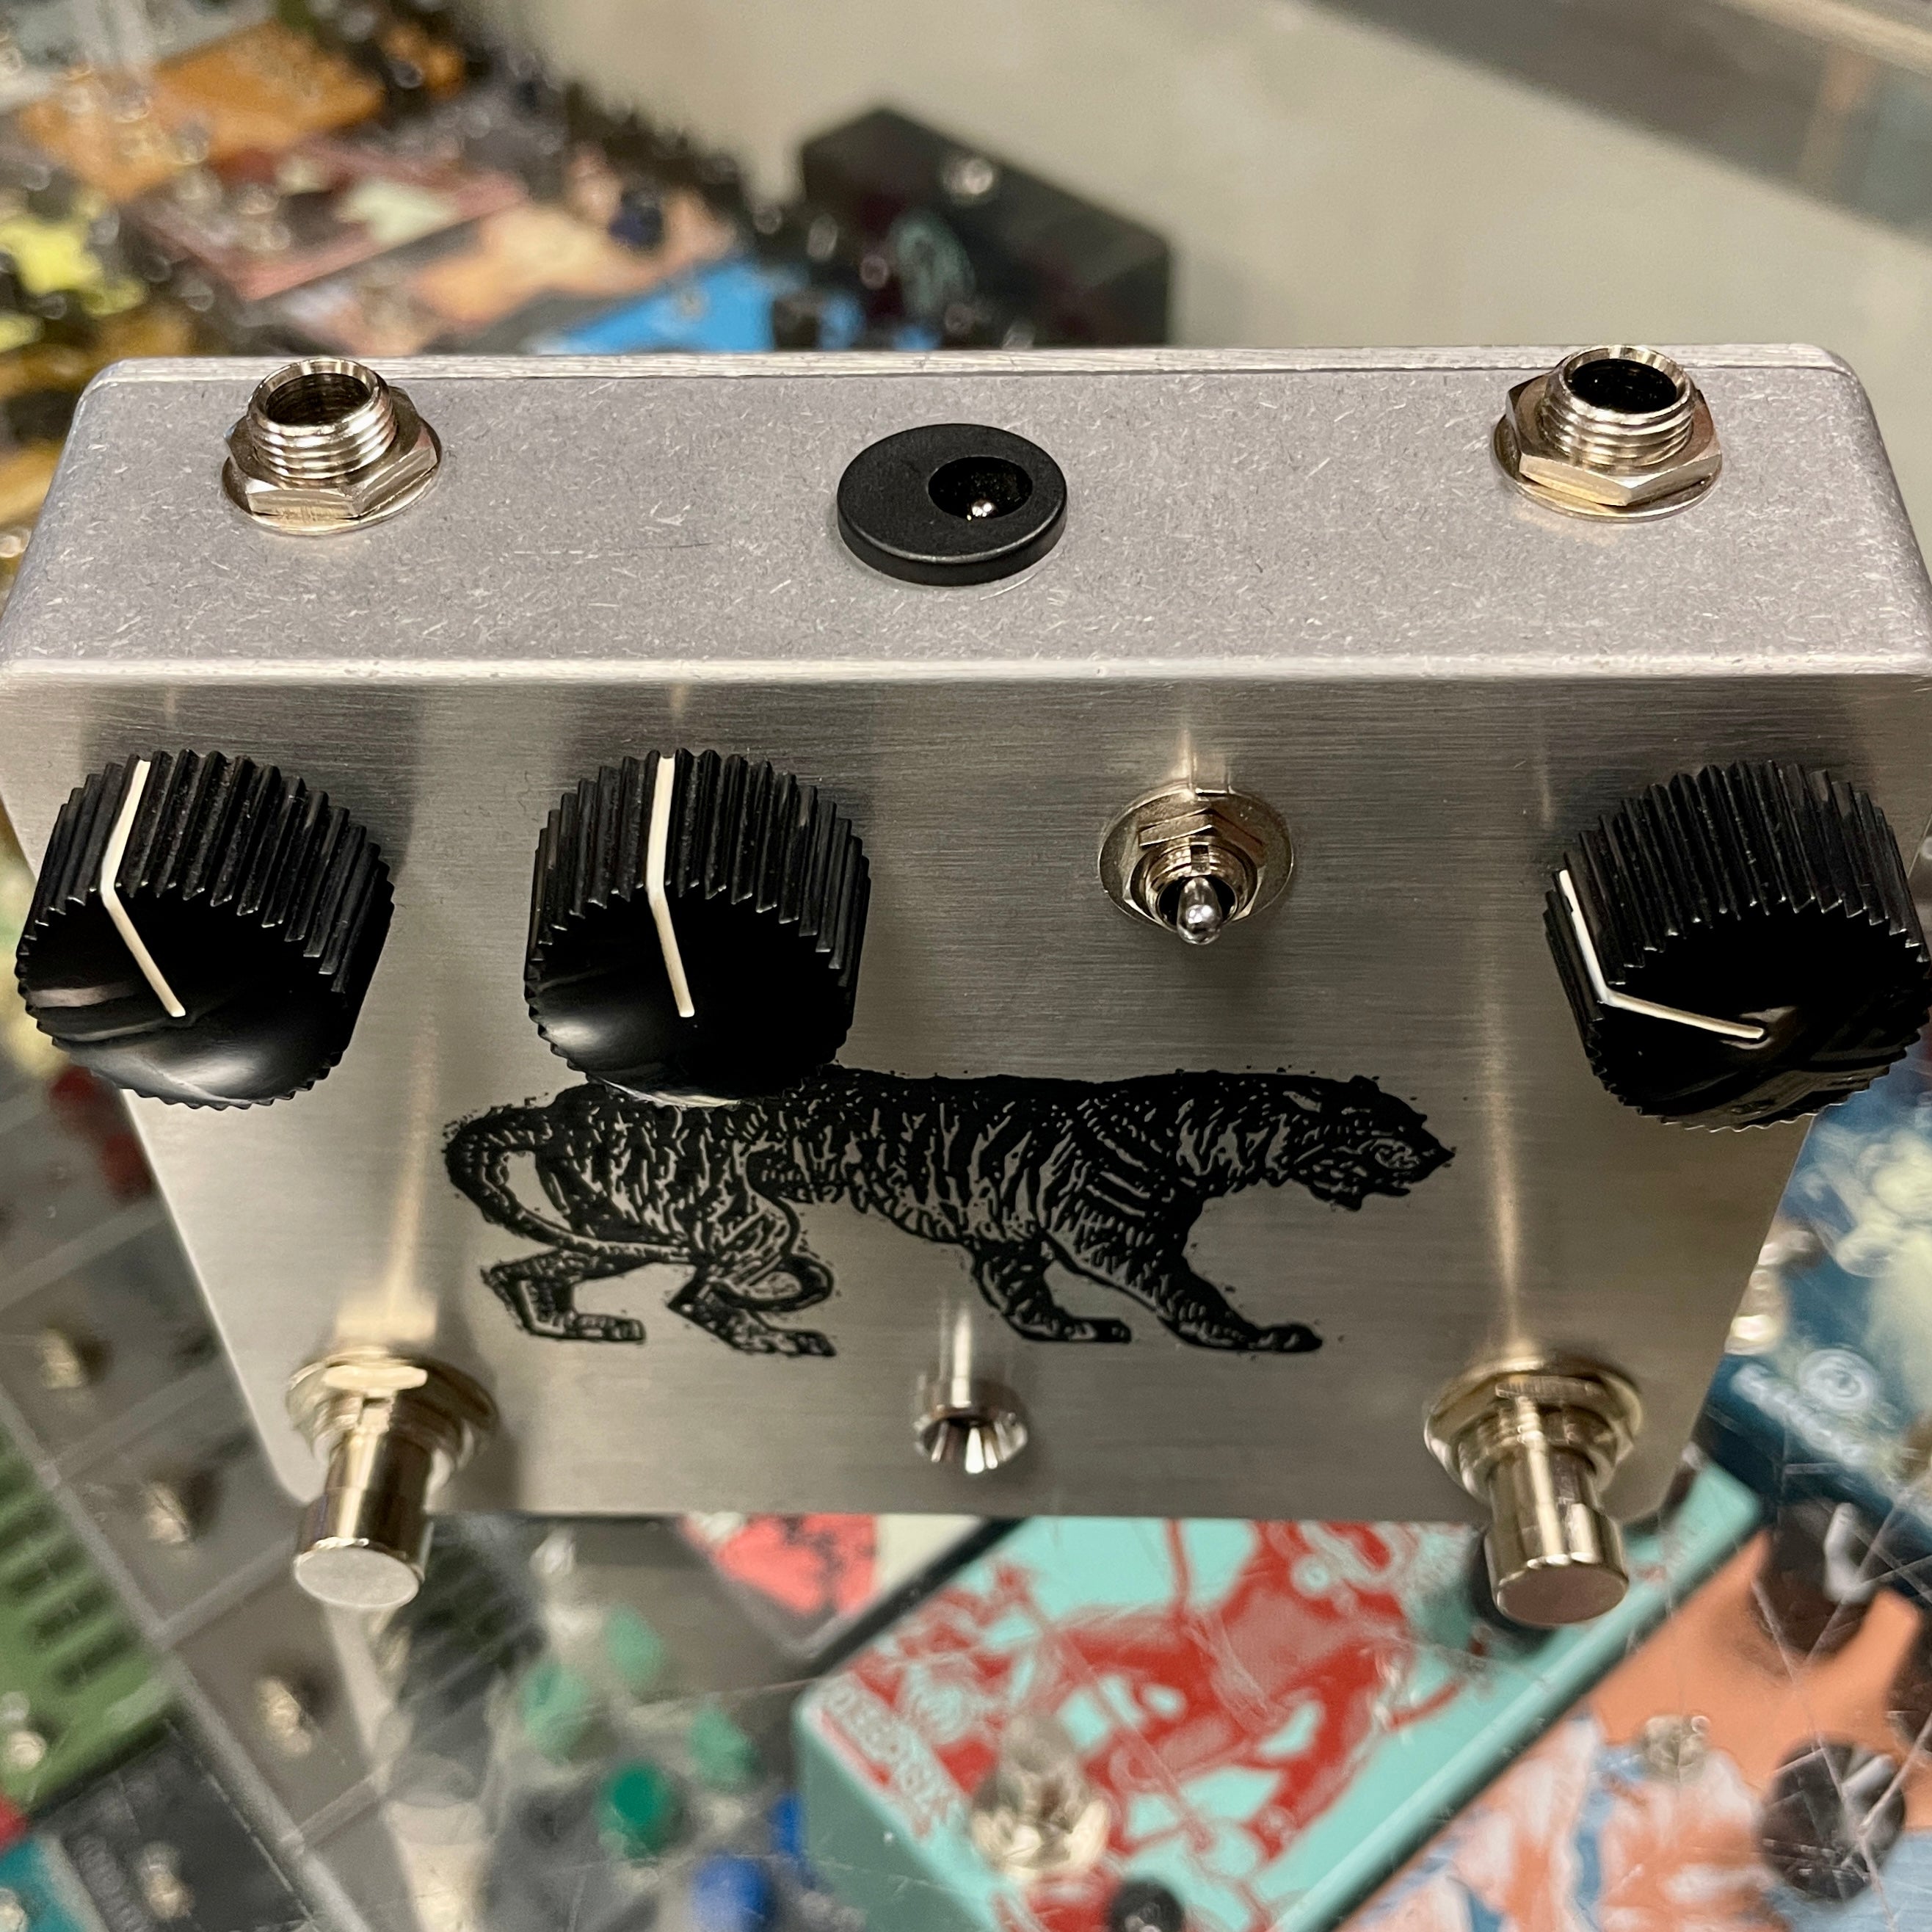 Petey's Pedals "Tiger" 2-Button Theremin Fuzz Pedal